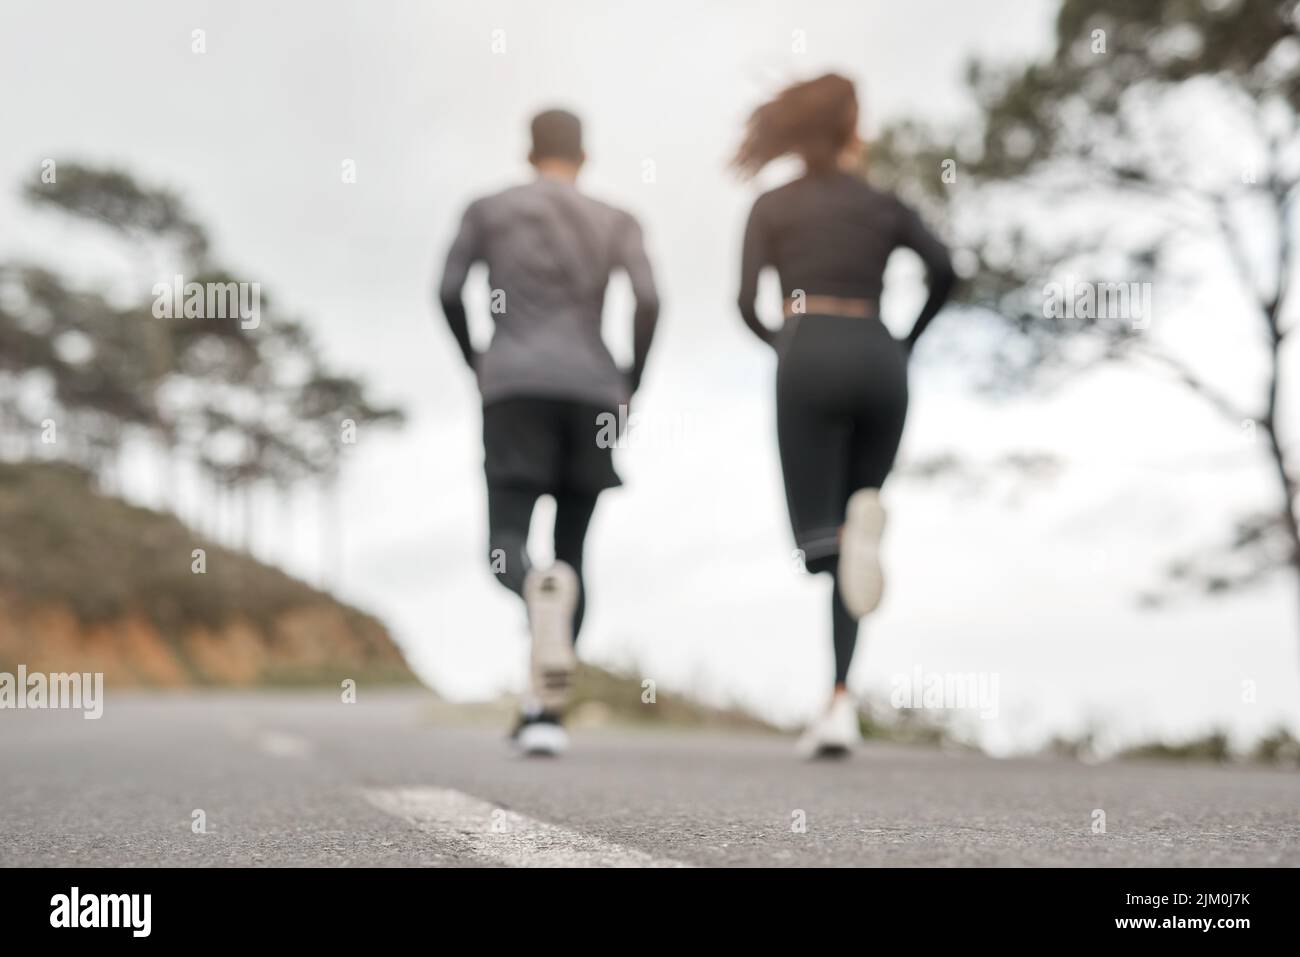 Count your breath, not your steps. Full length shot of two unrecognizable athletes bonding together during a run outdoors. Stock Photo